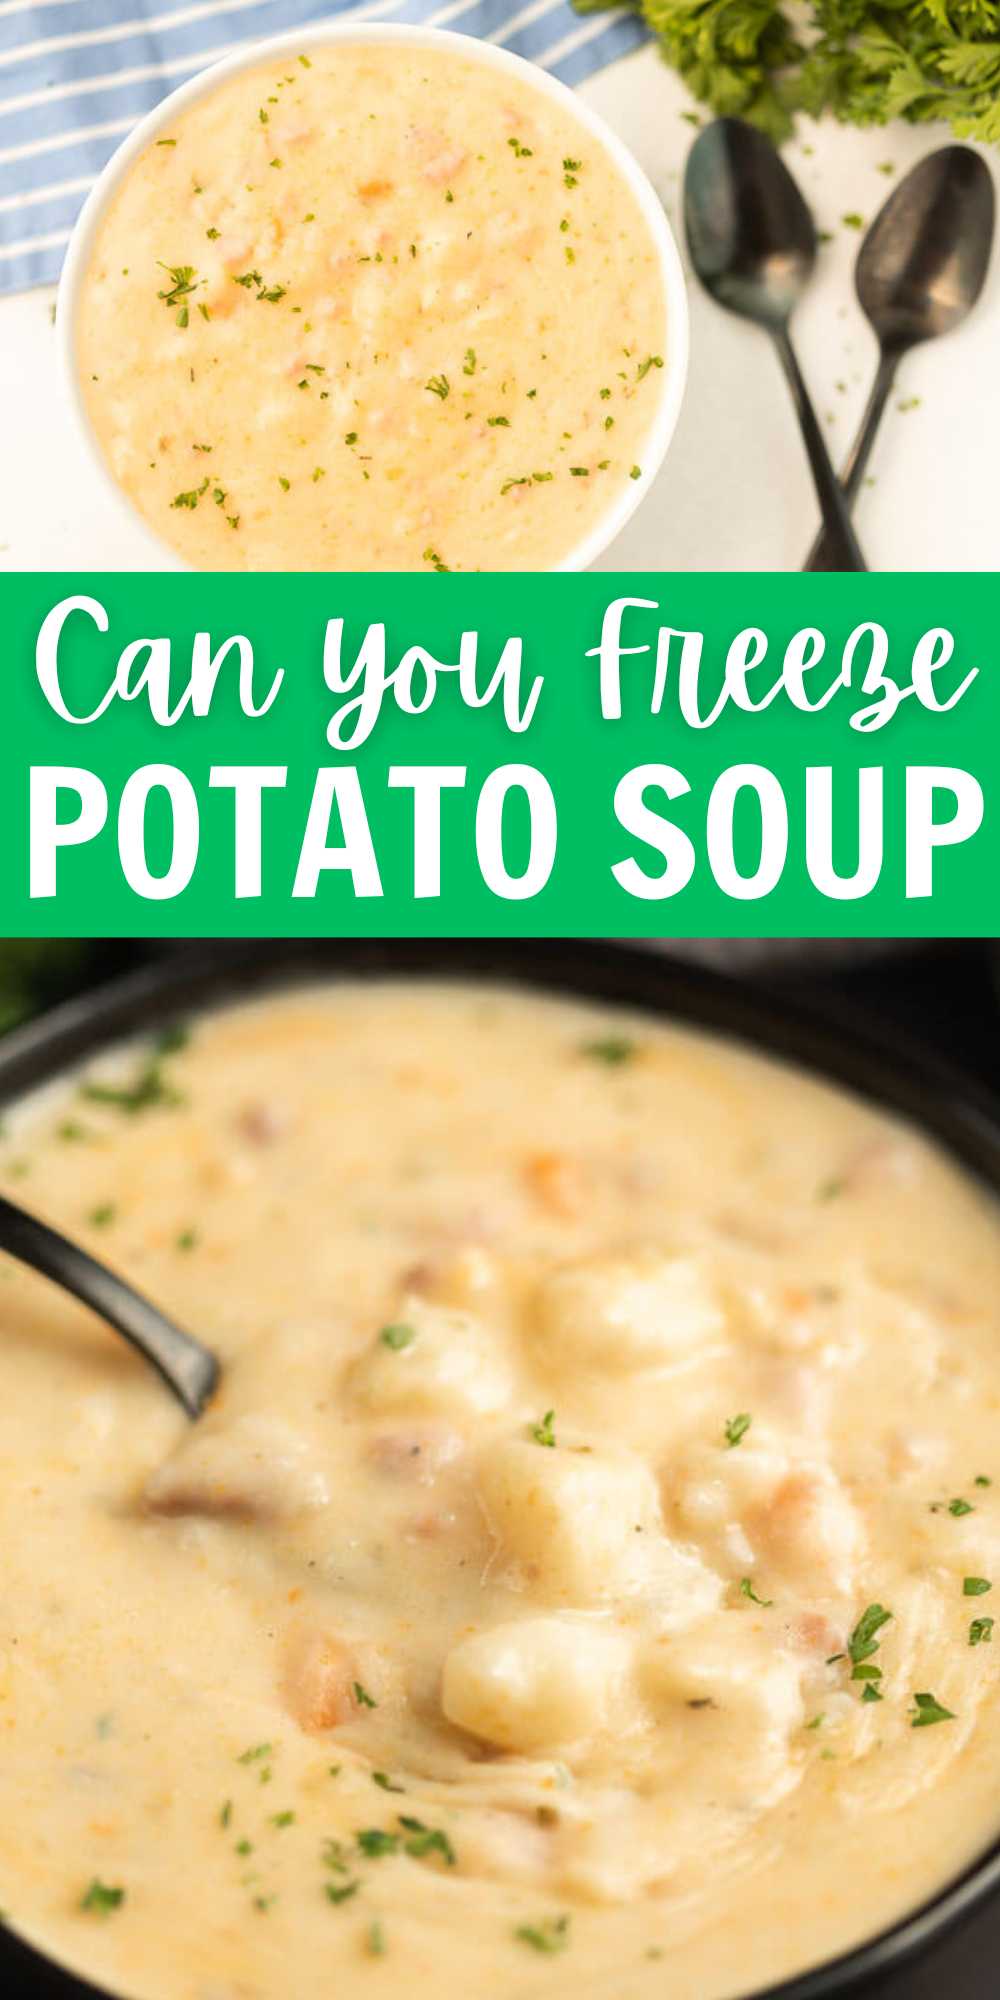 Potato Soup is delicious, but can you freeze potato soup? The answer is yes and it is so easy to do. Learn how to freeze potato soup. Also, potato soup is quite easy to make and enjoy leftovers later. Freeze this delicious soup to enjoy later. #eatingonadime #canyoufreezepotatosoup #freezertips